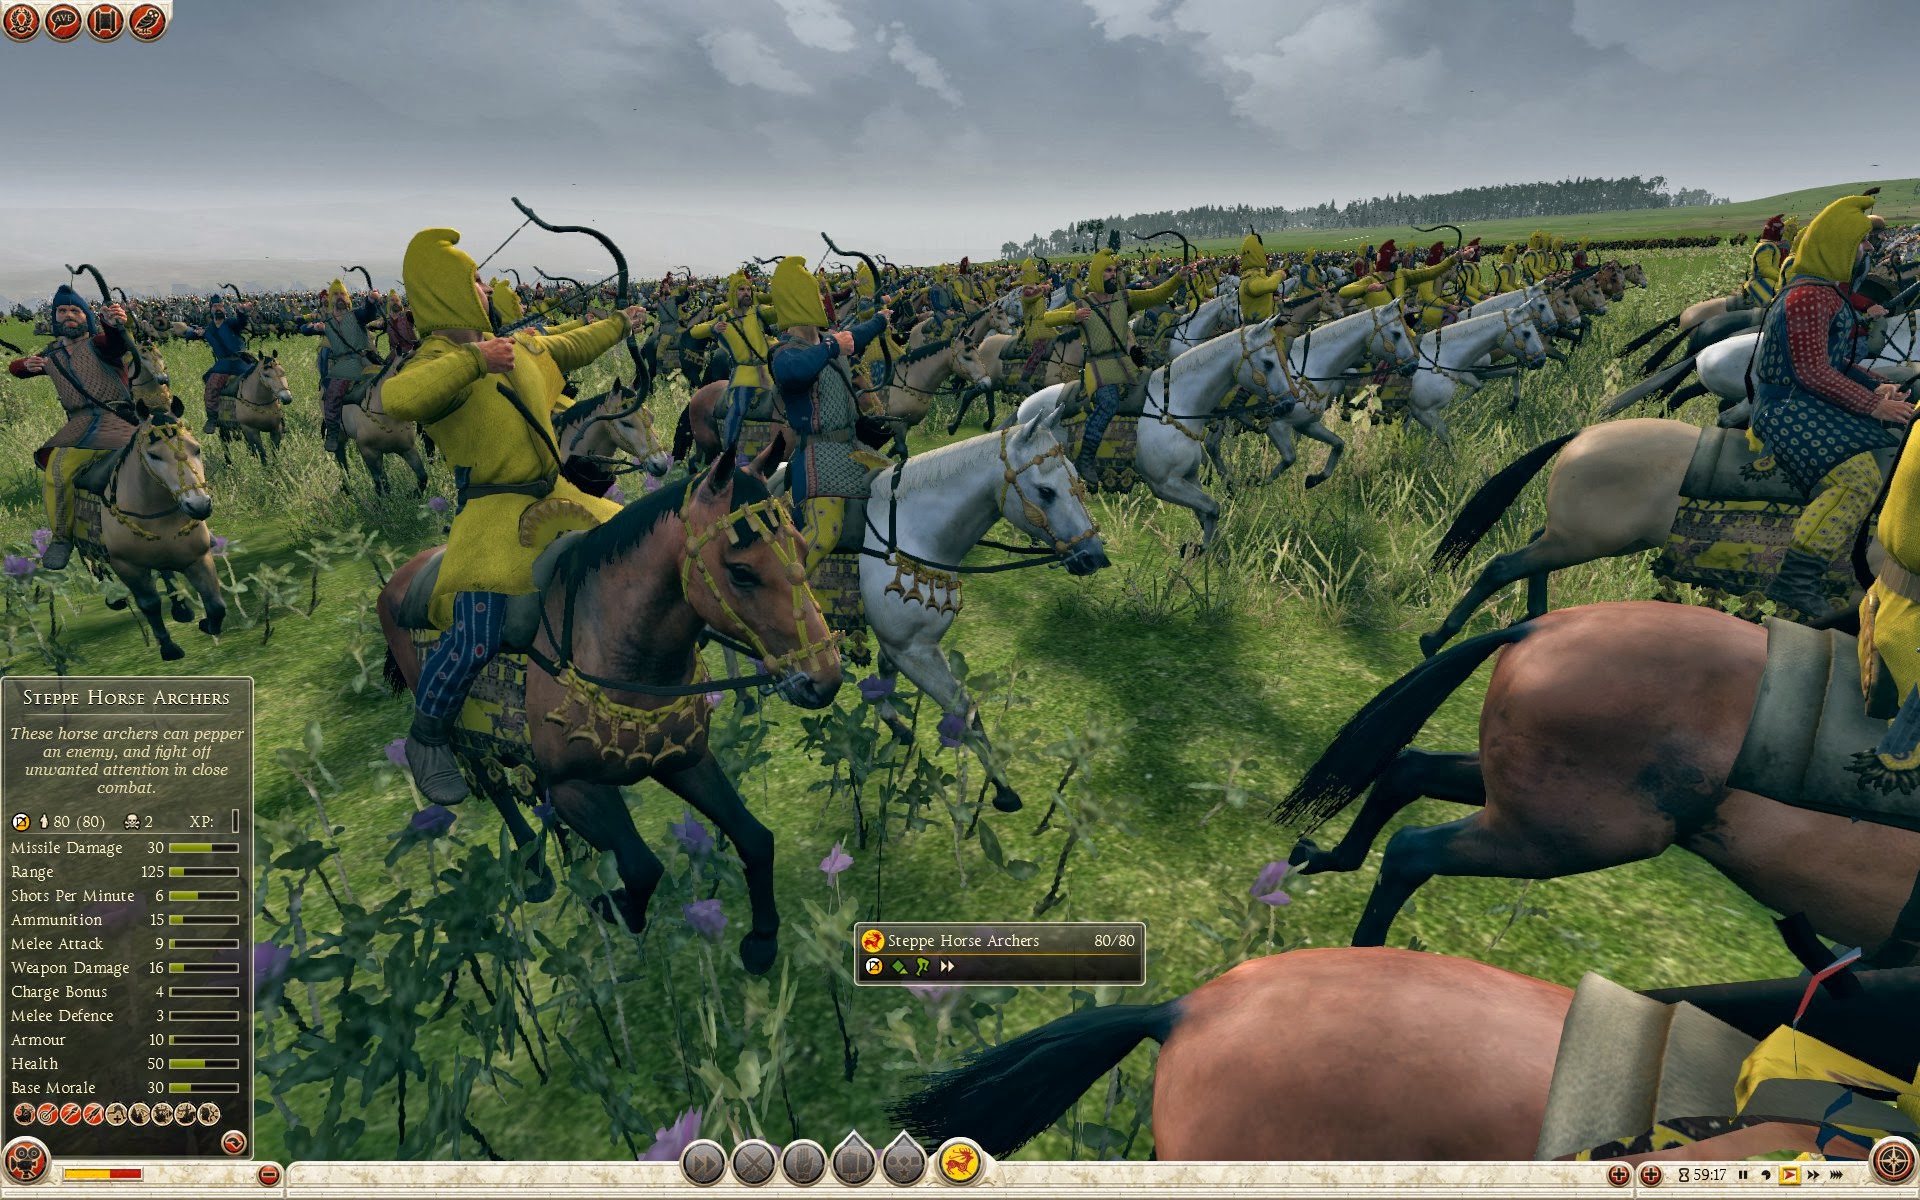 Steppe Horse Archers